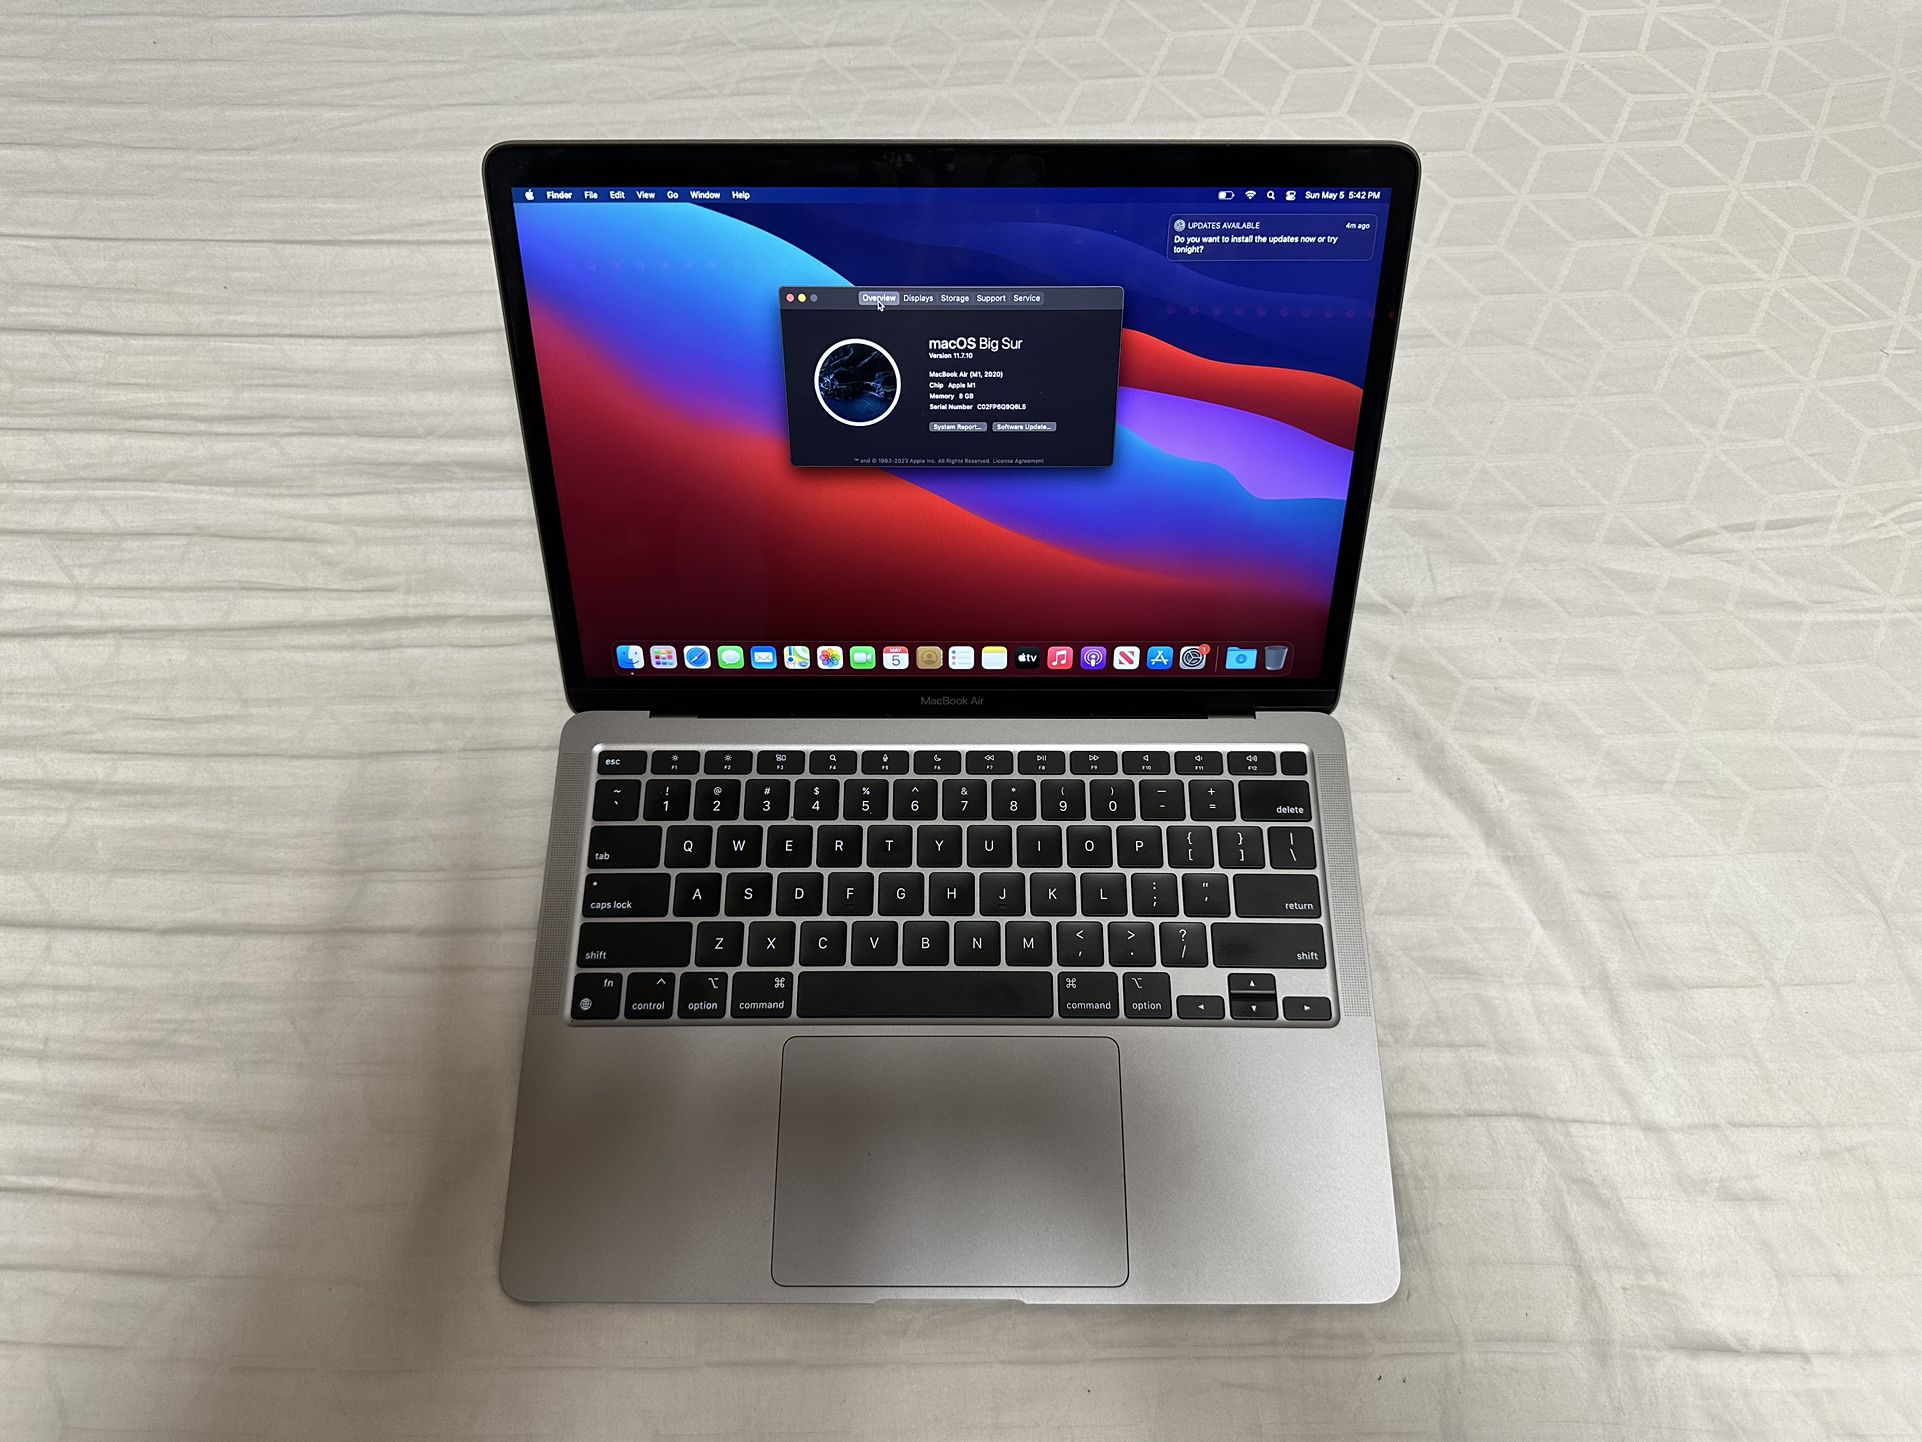 Apple MacBook Air 13in (512GB SSD, M1, 8GB) Laptop - Space Gray - MGN73LL/A...